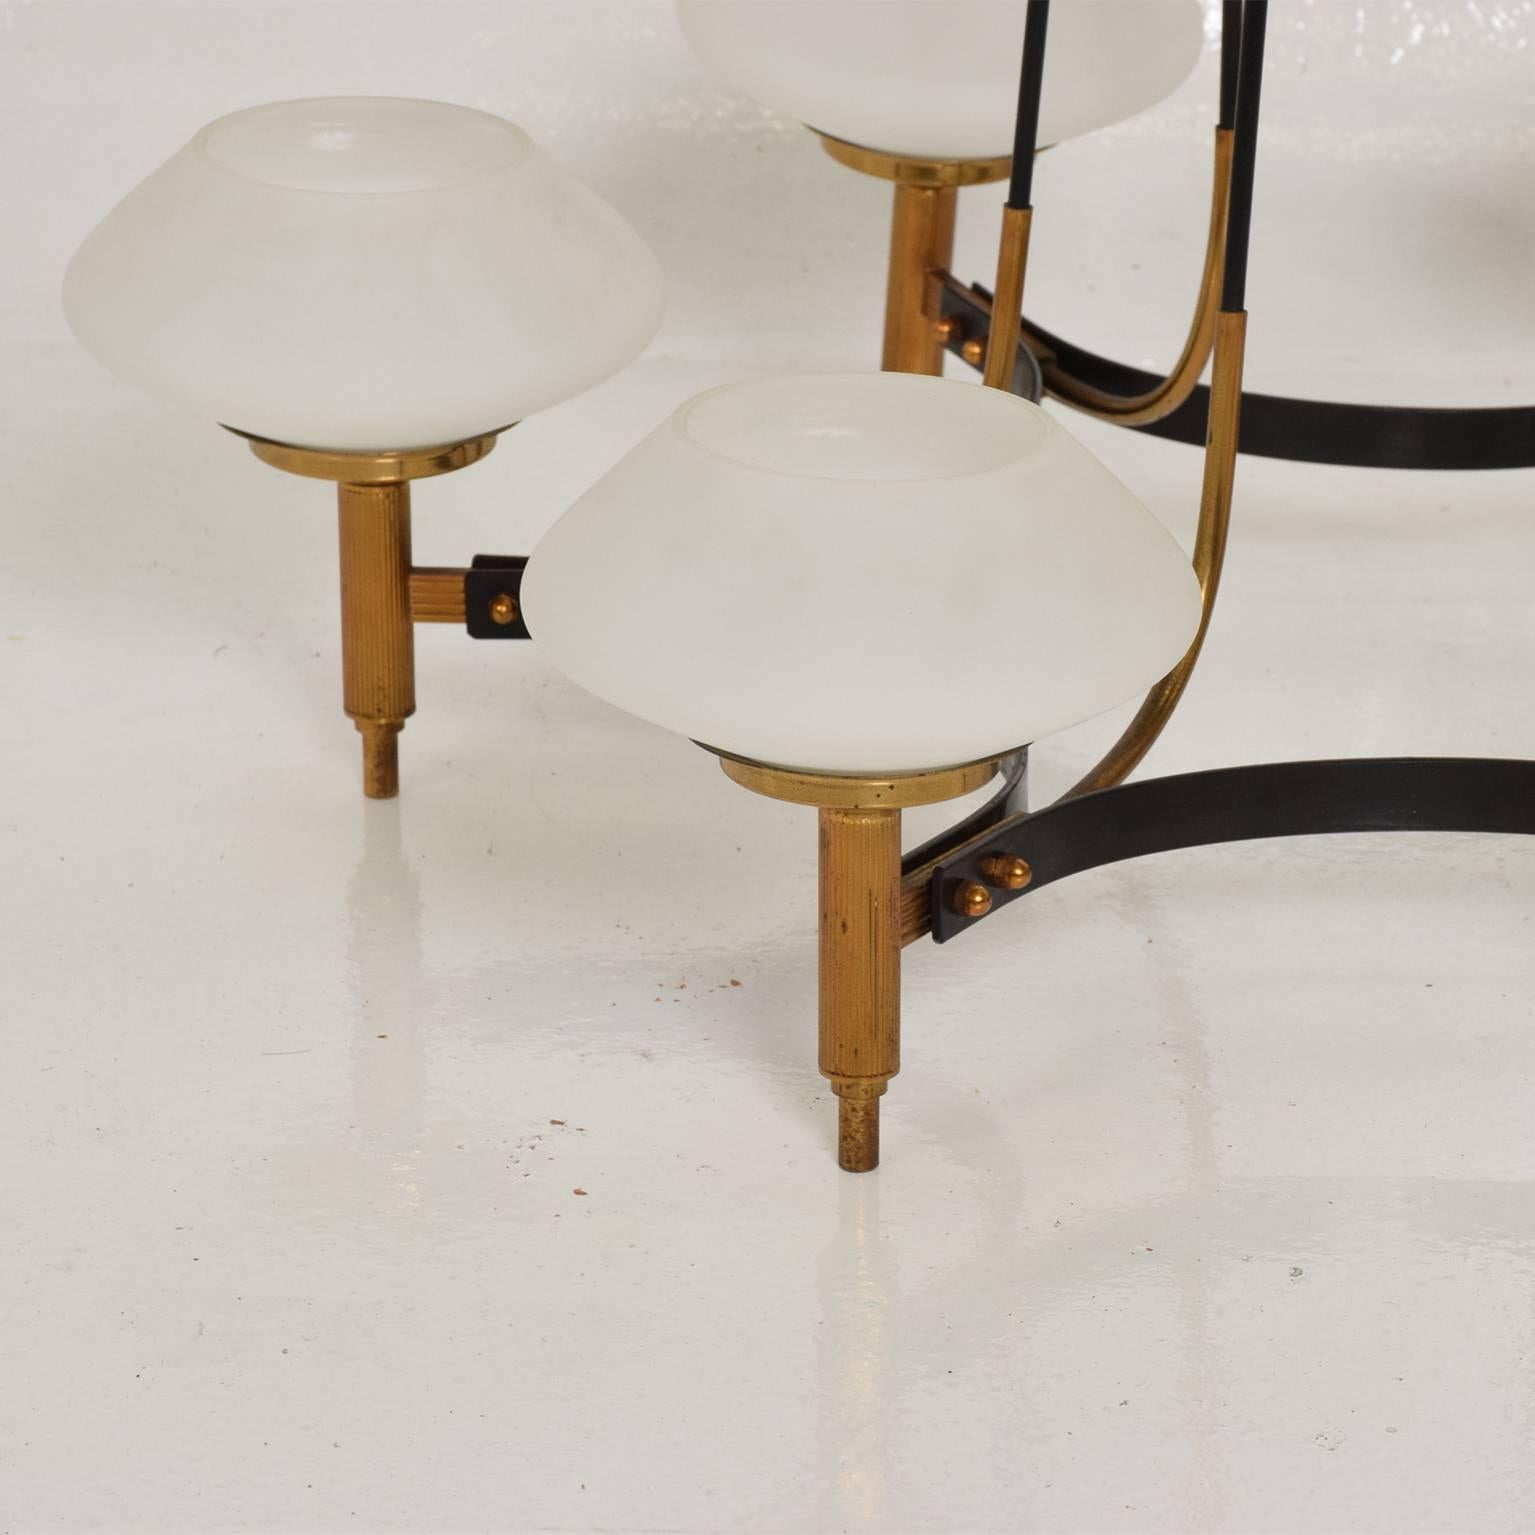 For your consideration an Italian Mid-Century Modern chandelier with a sculptural shape. Glass shades.
Dimensions: 32